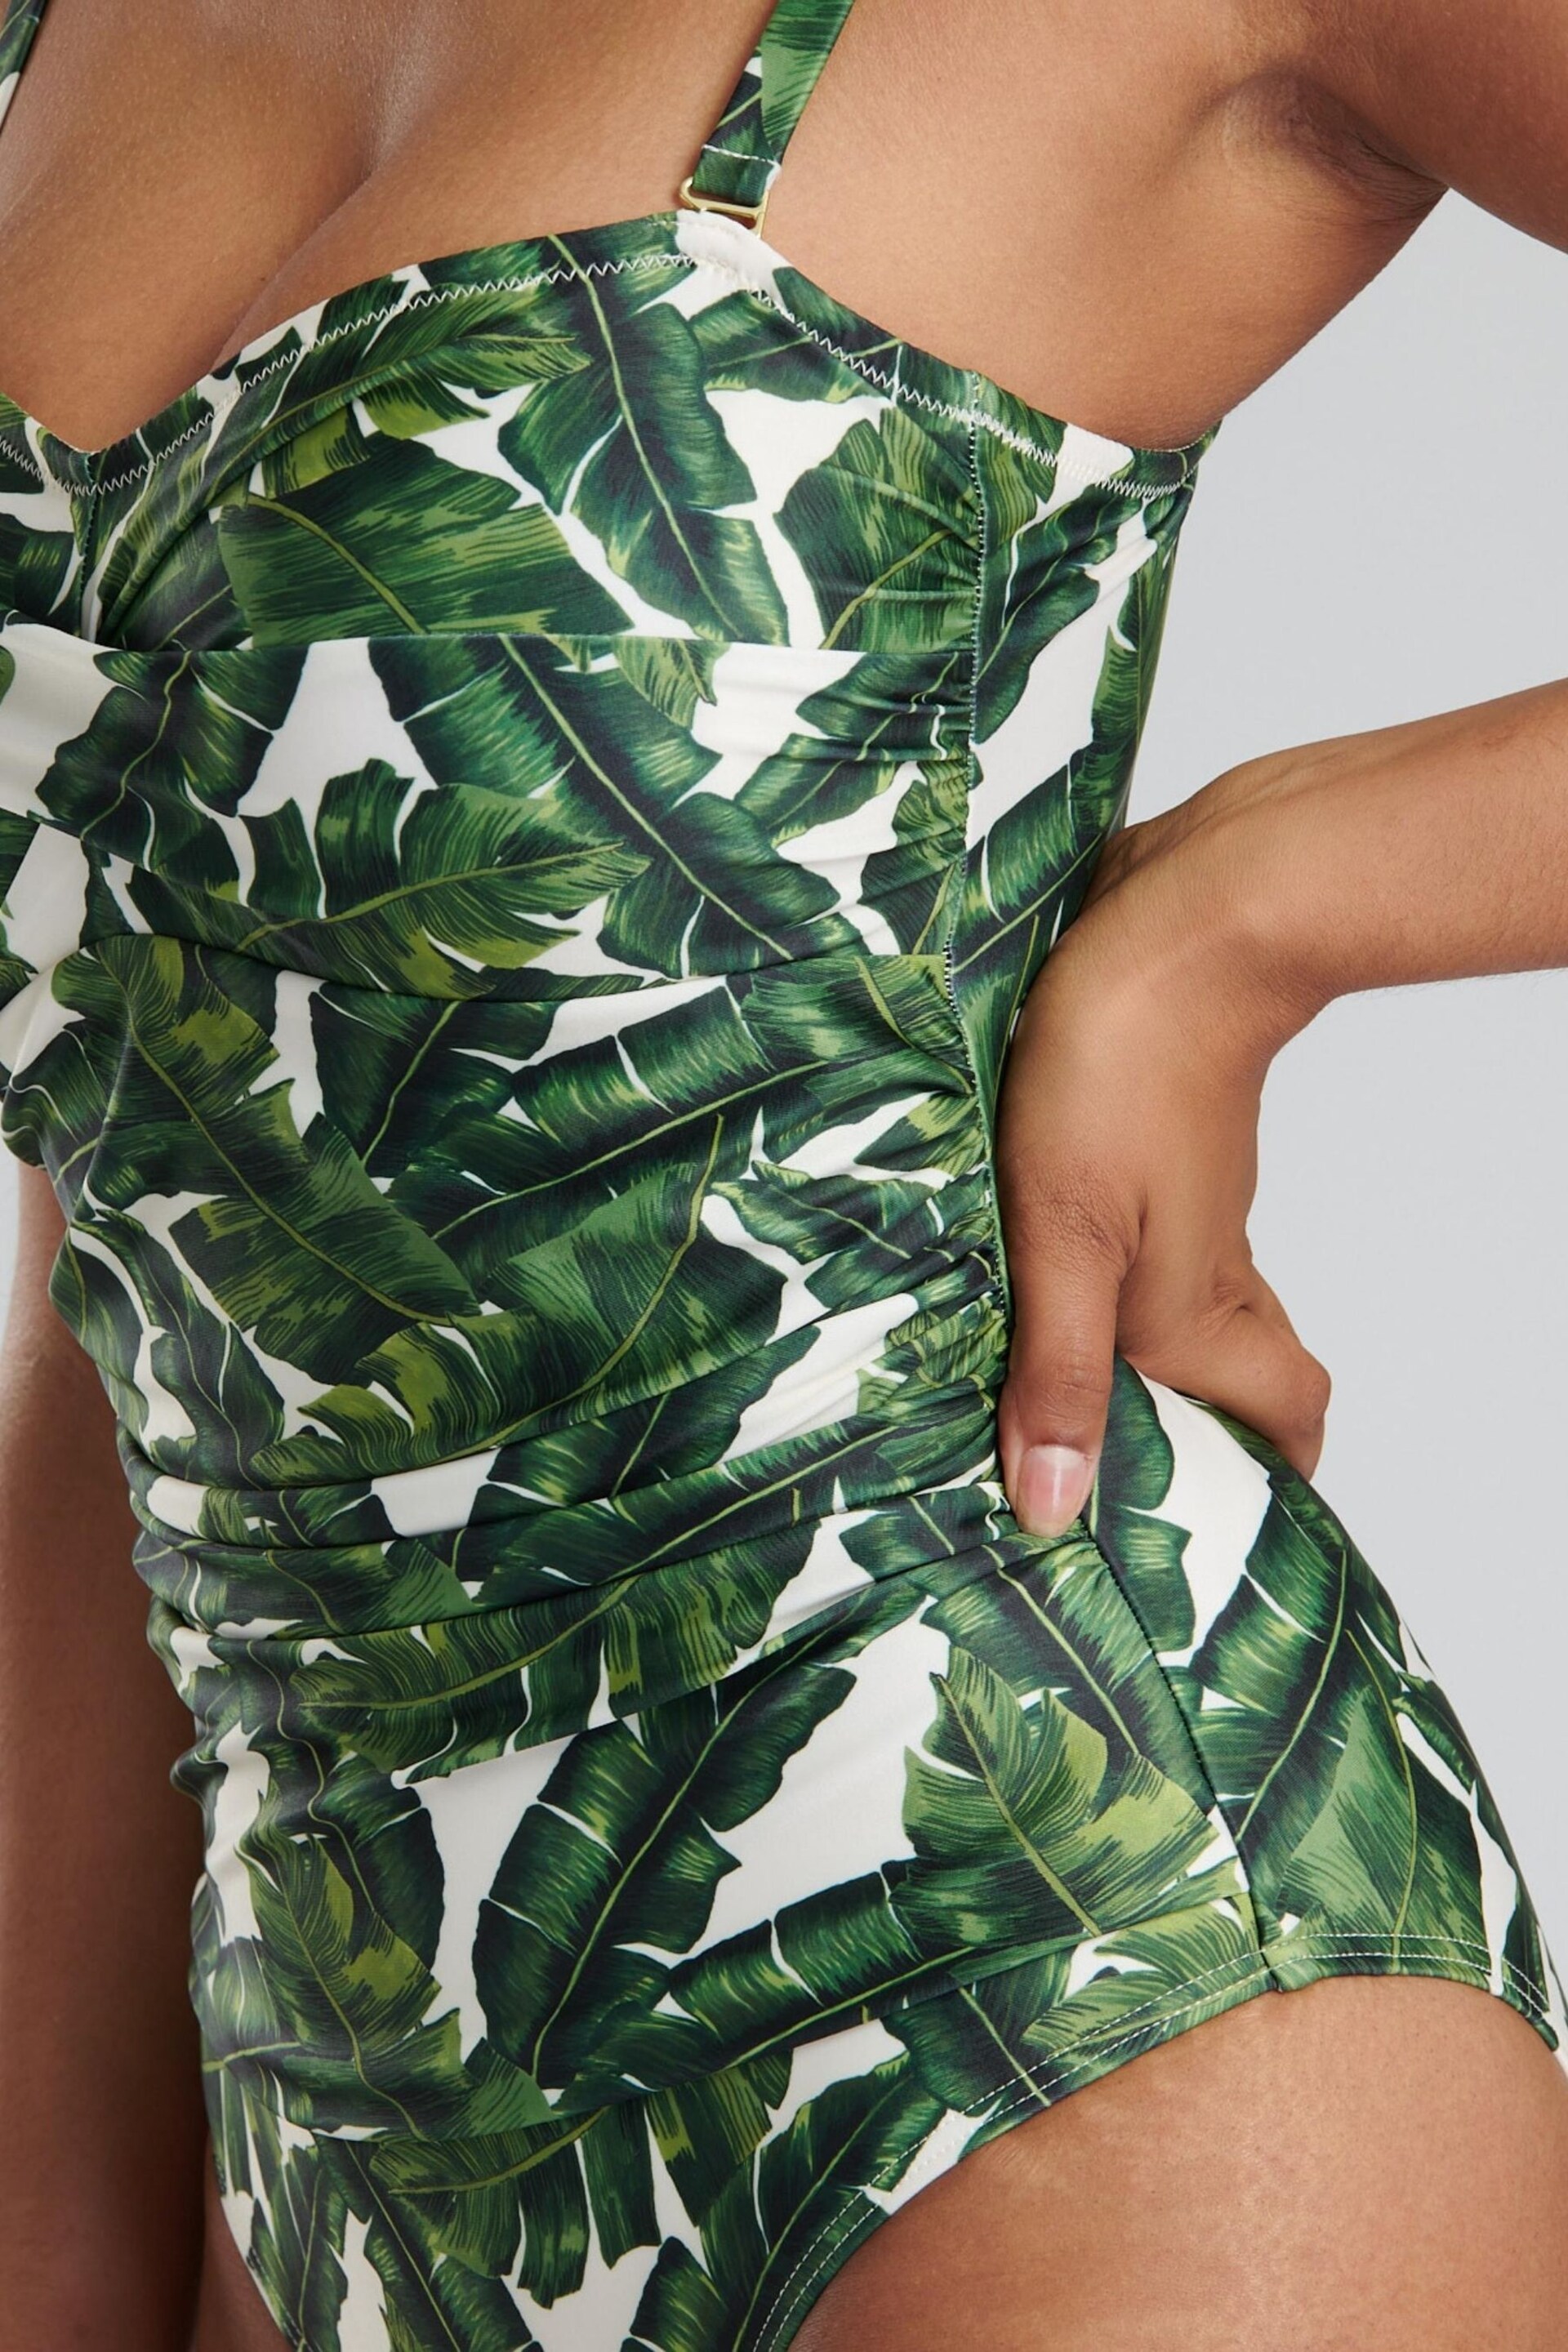 South Beach Green Leaf Print Twist Swimsuit with Tummy Control - Image 6 of 6